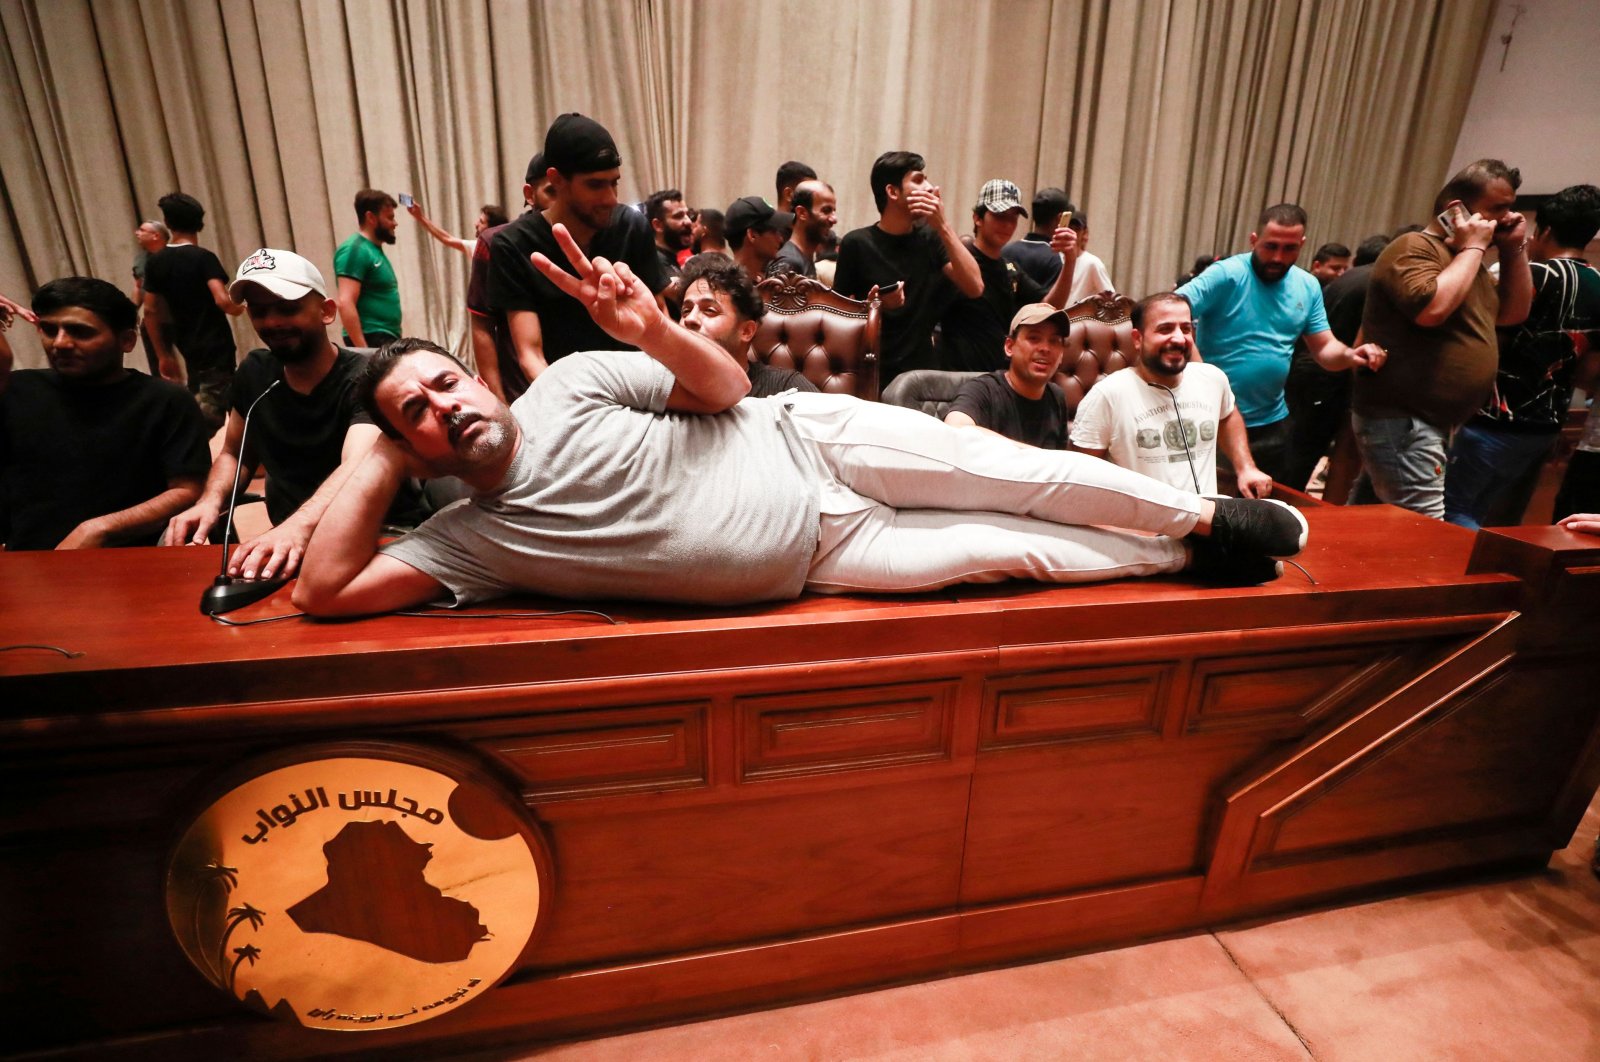 A supporter of Iraqi cleric Muqtada al-Sadr lies on the desk of the speaker of the Iraqi parliament, as demonstrators gather inside the Iraqi parliament, in the high-security Green Zone, Baghdad, Iraq, July 27, 2022. (AFP Photo)